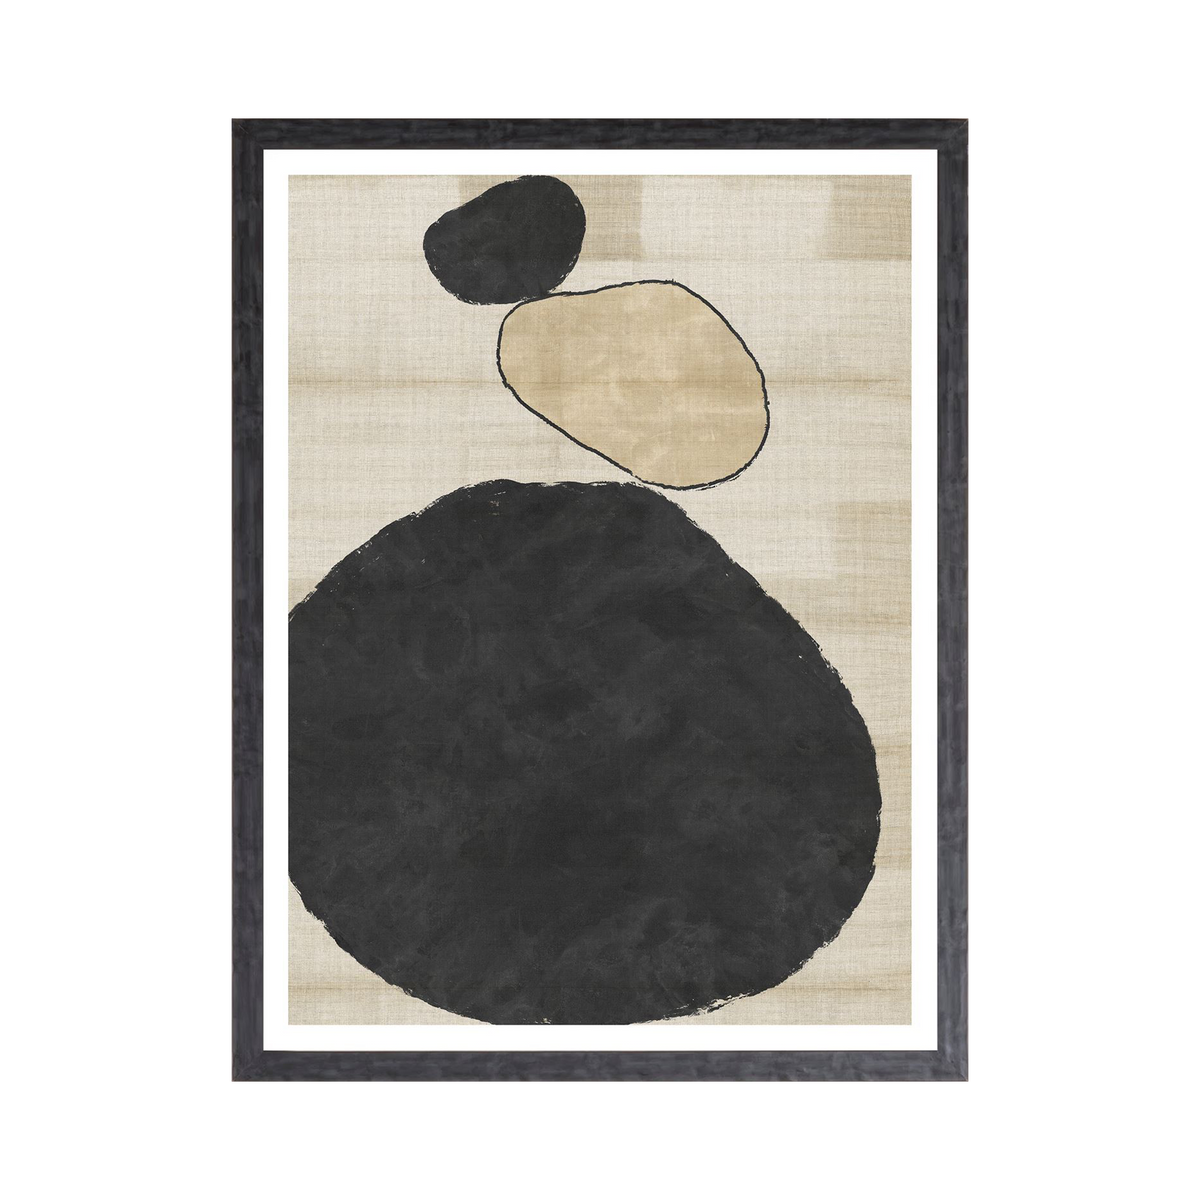 Organic shapes in charcoal and tan, playfully balancing within the picture frame.